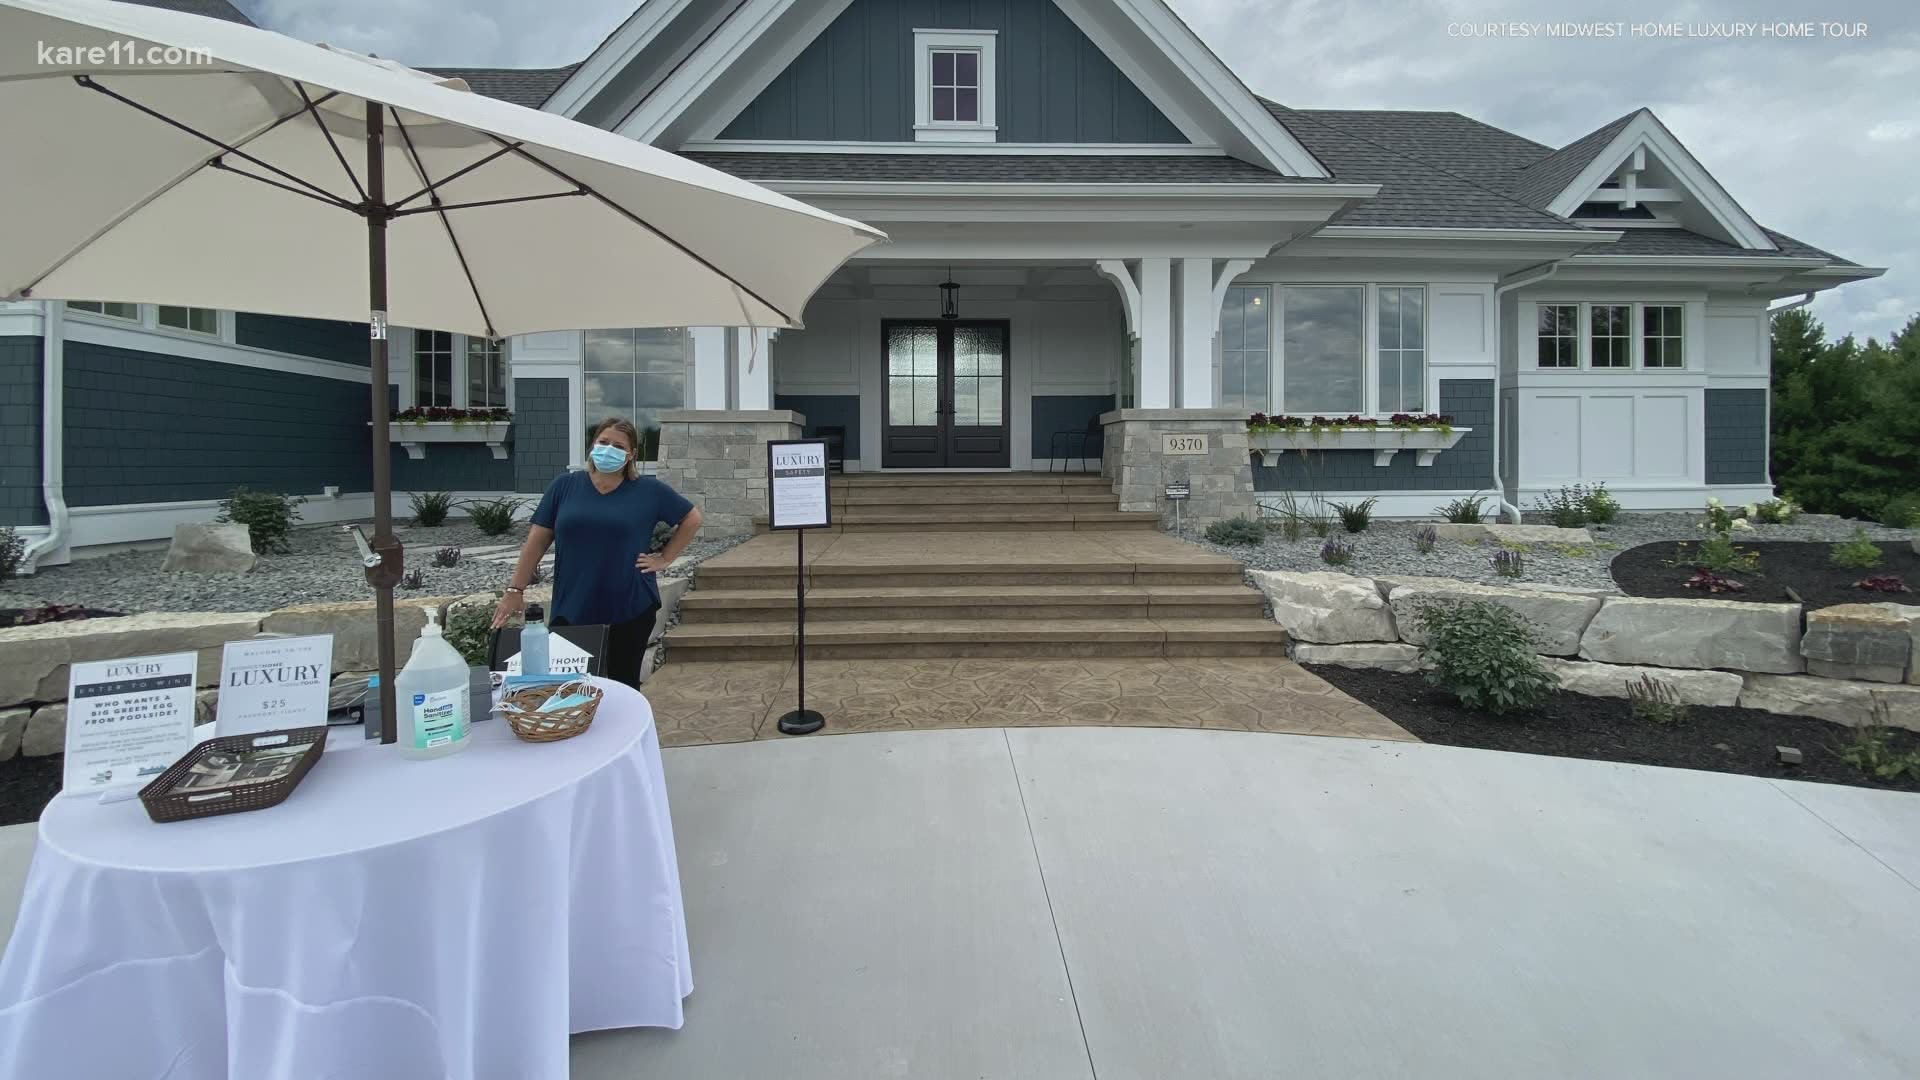 Check out Midwest Home's 19th annual Luxury Home Tour.